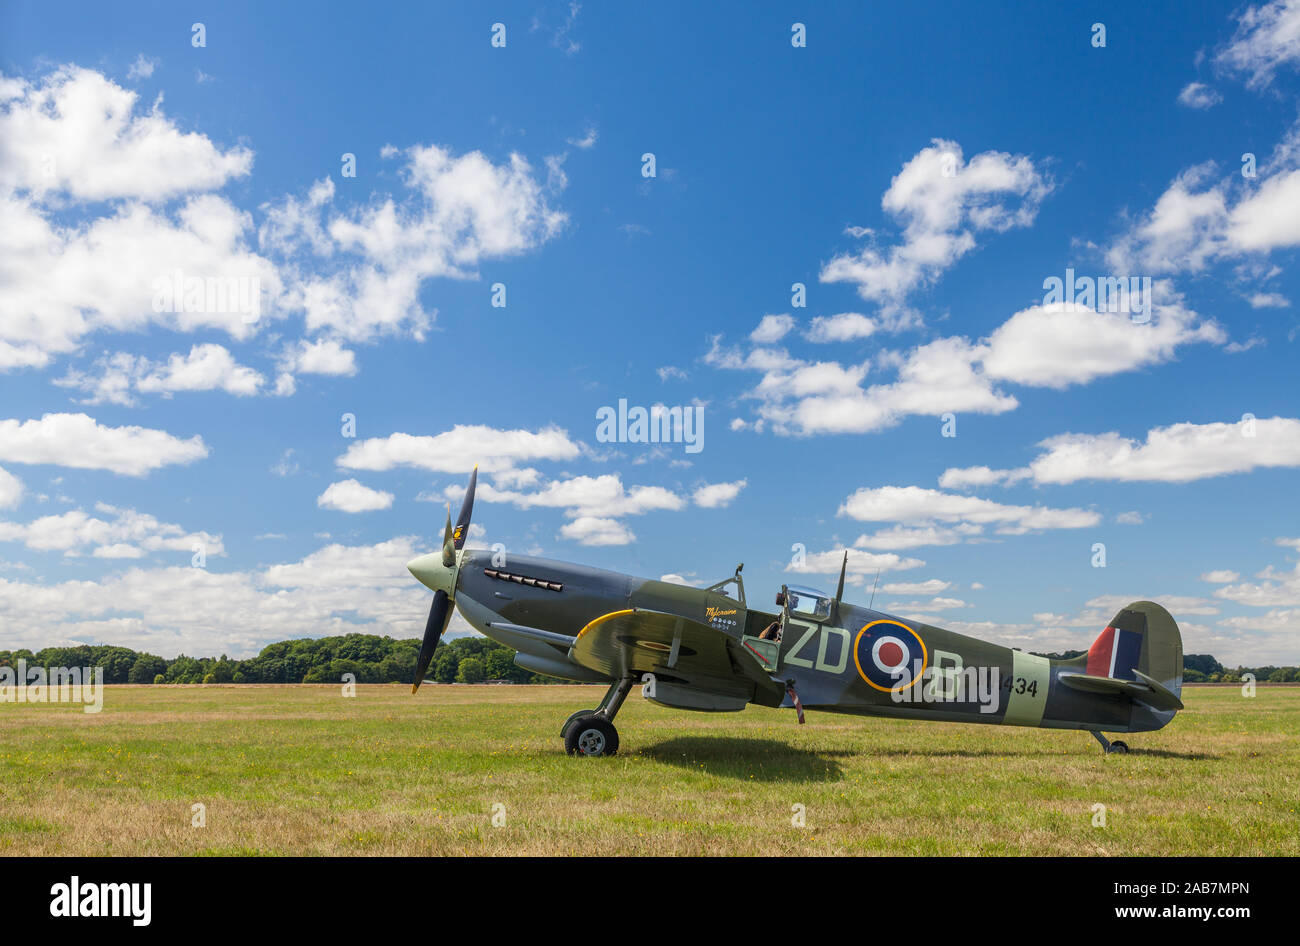 SUPERMARINE SPITFIRE MARK IXB, MH434, ENGLAND – AUGUST 11 2013, Supermarine Spitfire Mark IXb World War Two fighter plane, parked by the grass runway Stock Photo